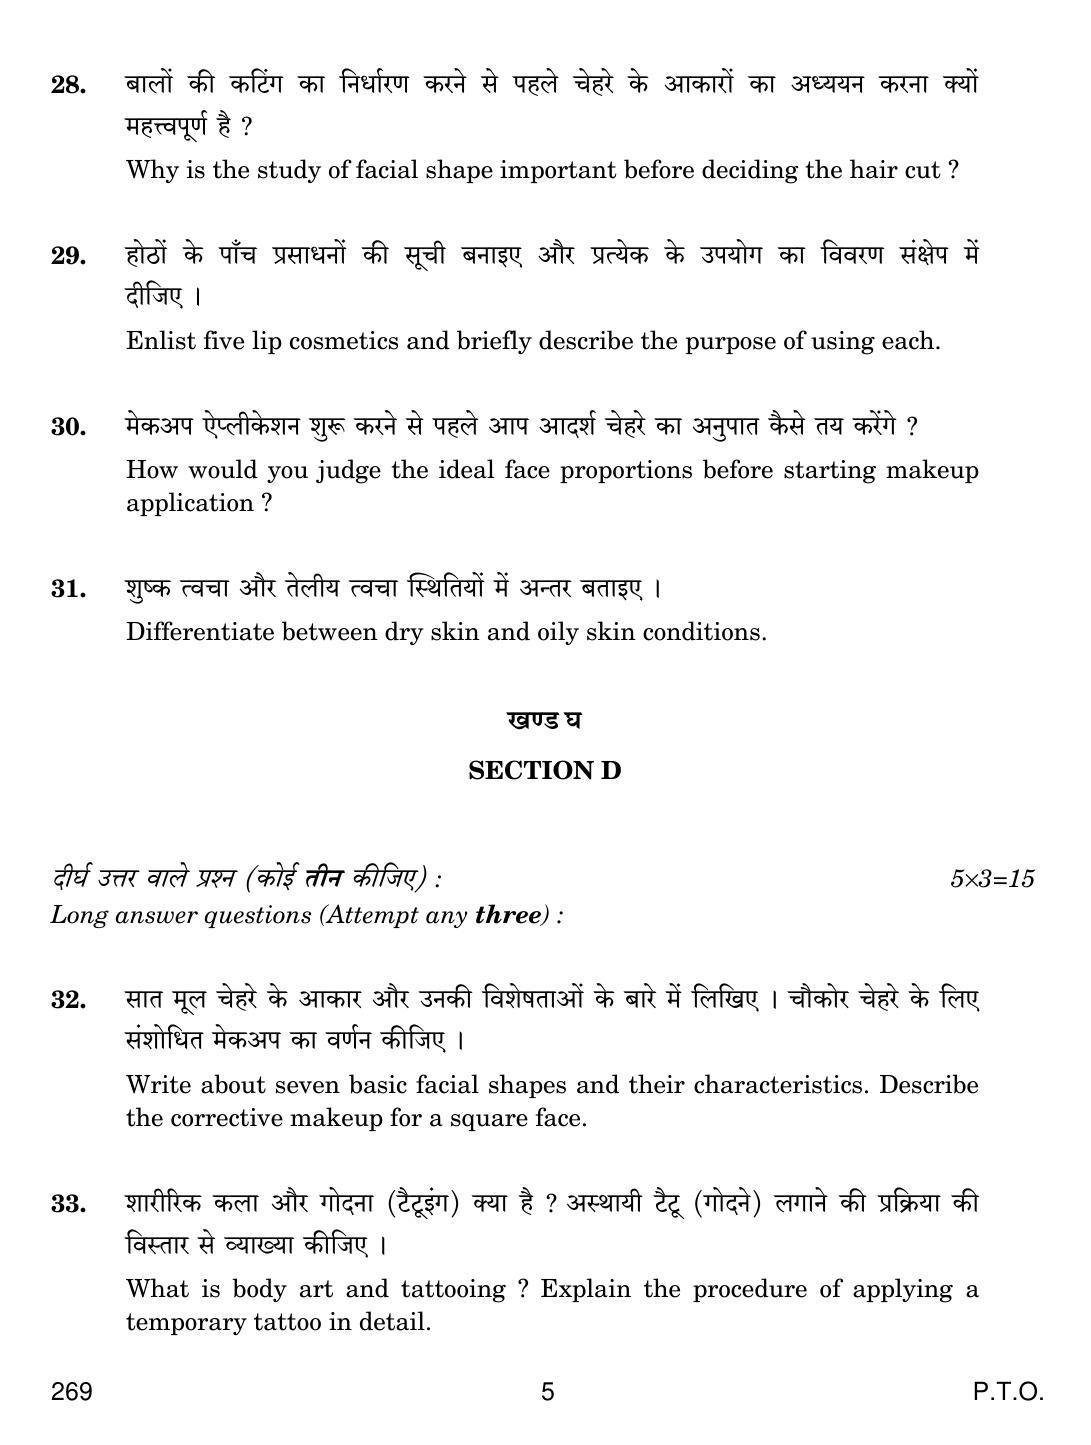 CBSE Class 12 269 BEAUTY AND HAIR 2018 Question Paper - Page 5